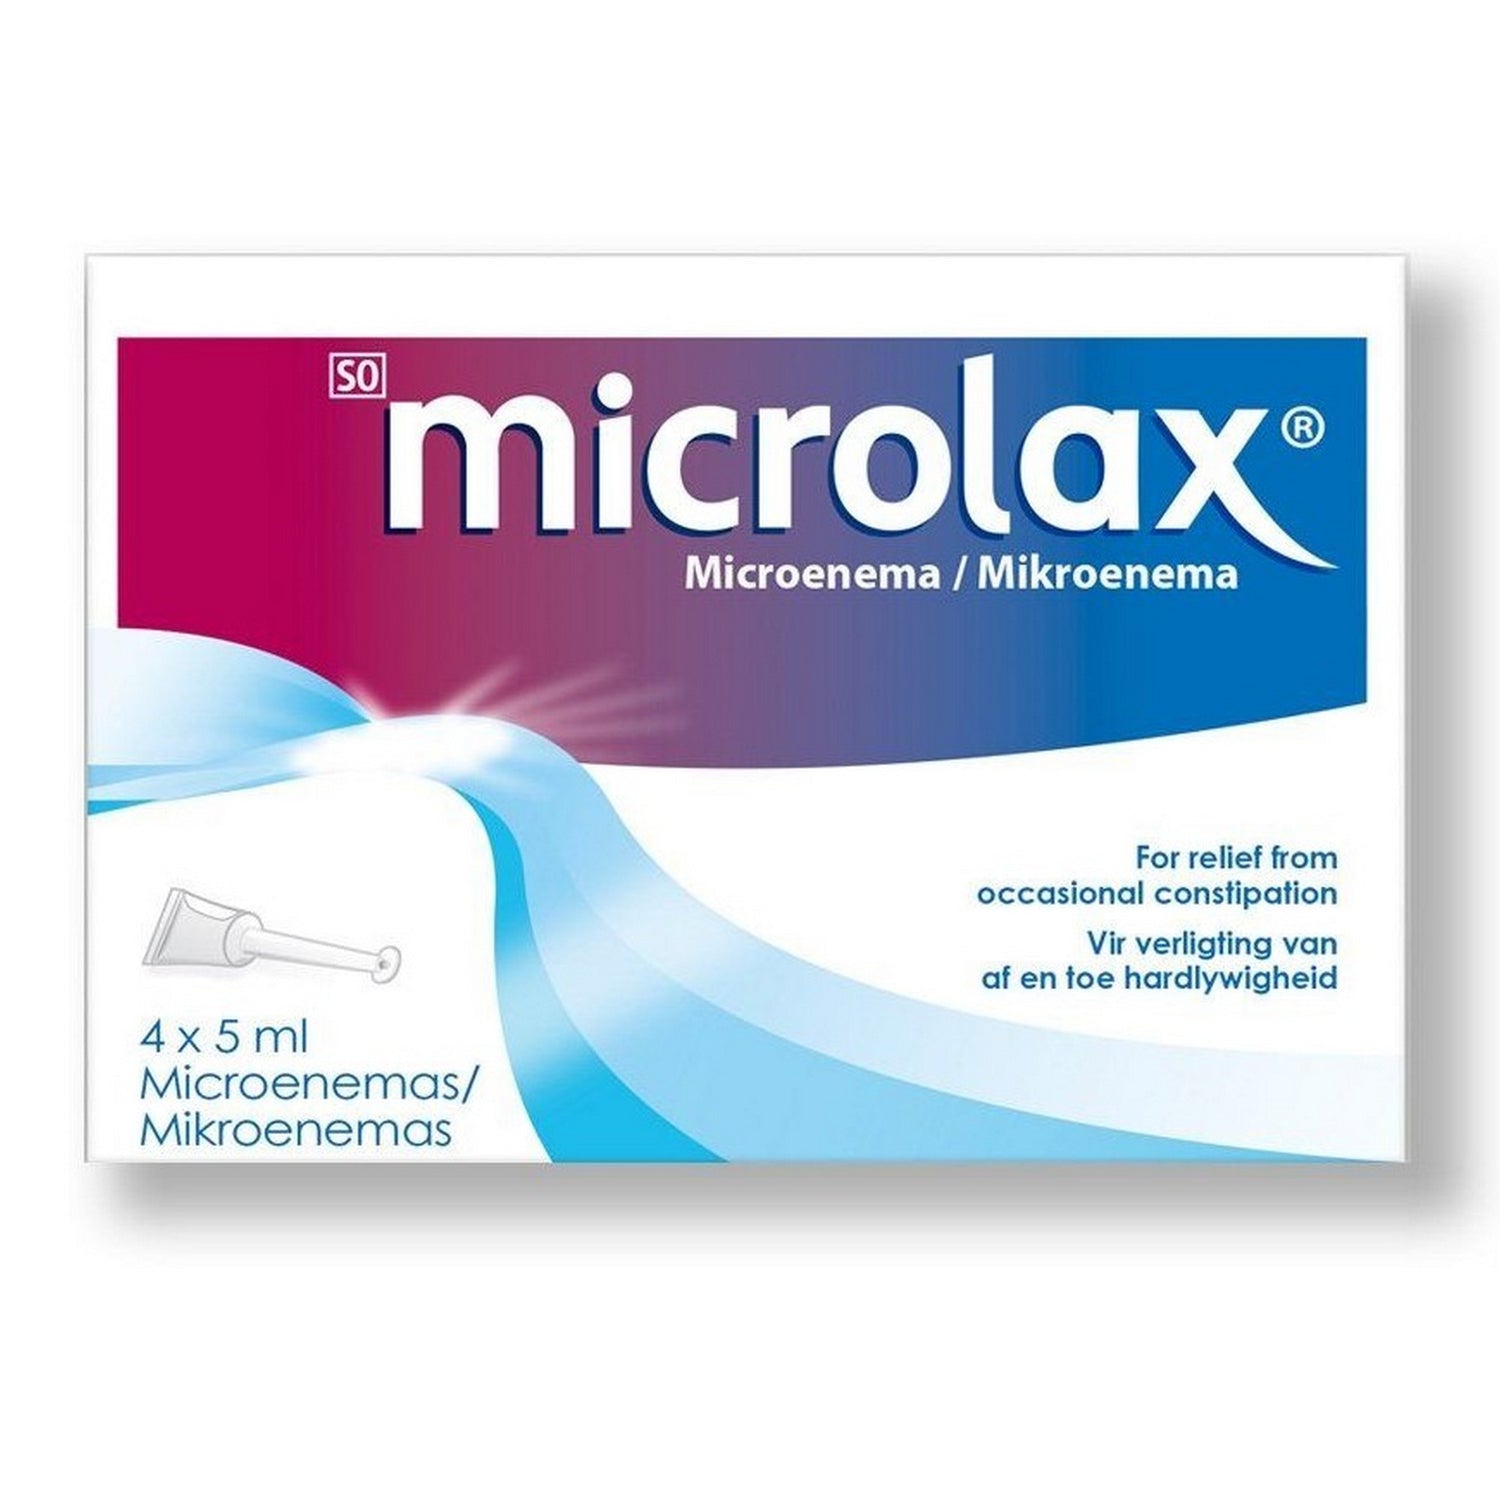 Microlax Solution Rectale 4x5ml